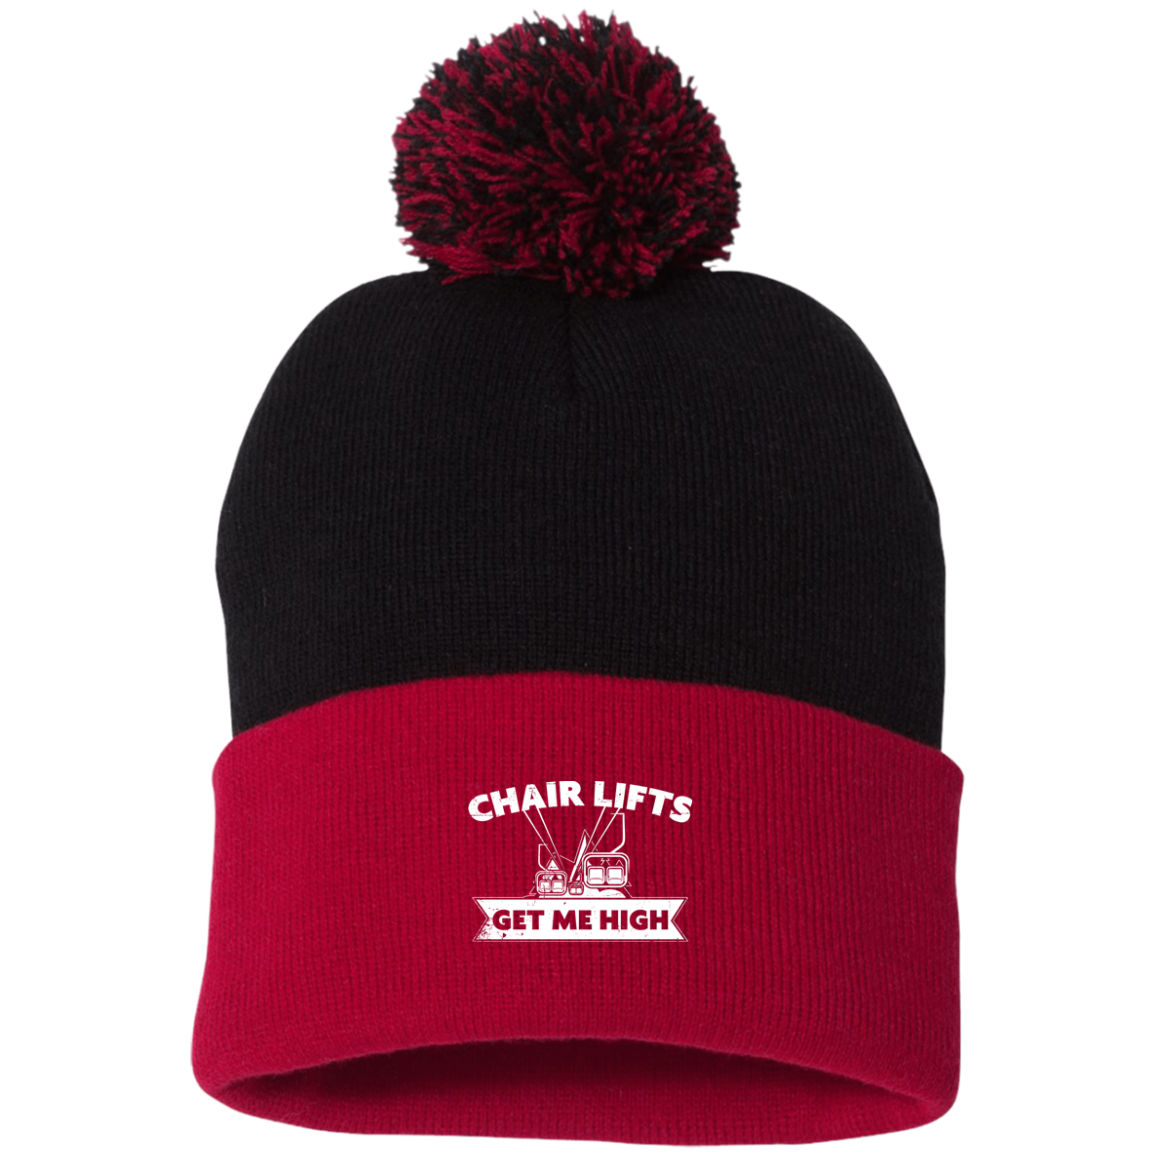 Chairlifts Get Me High Pom Pom Knit Cap - Powderaddicts